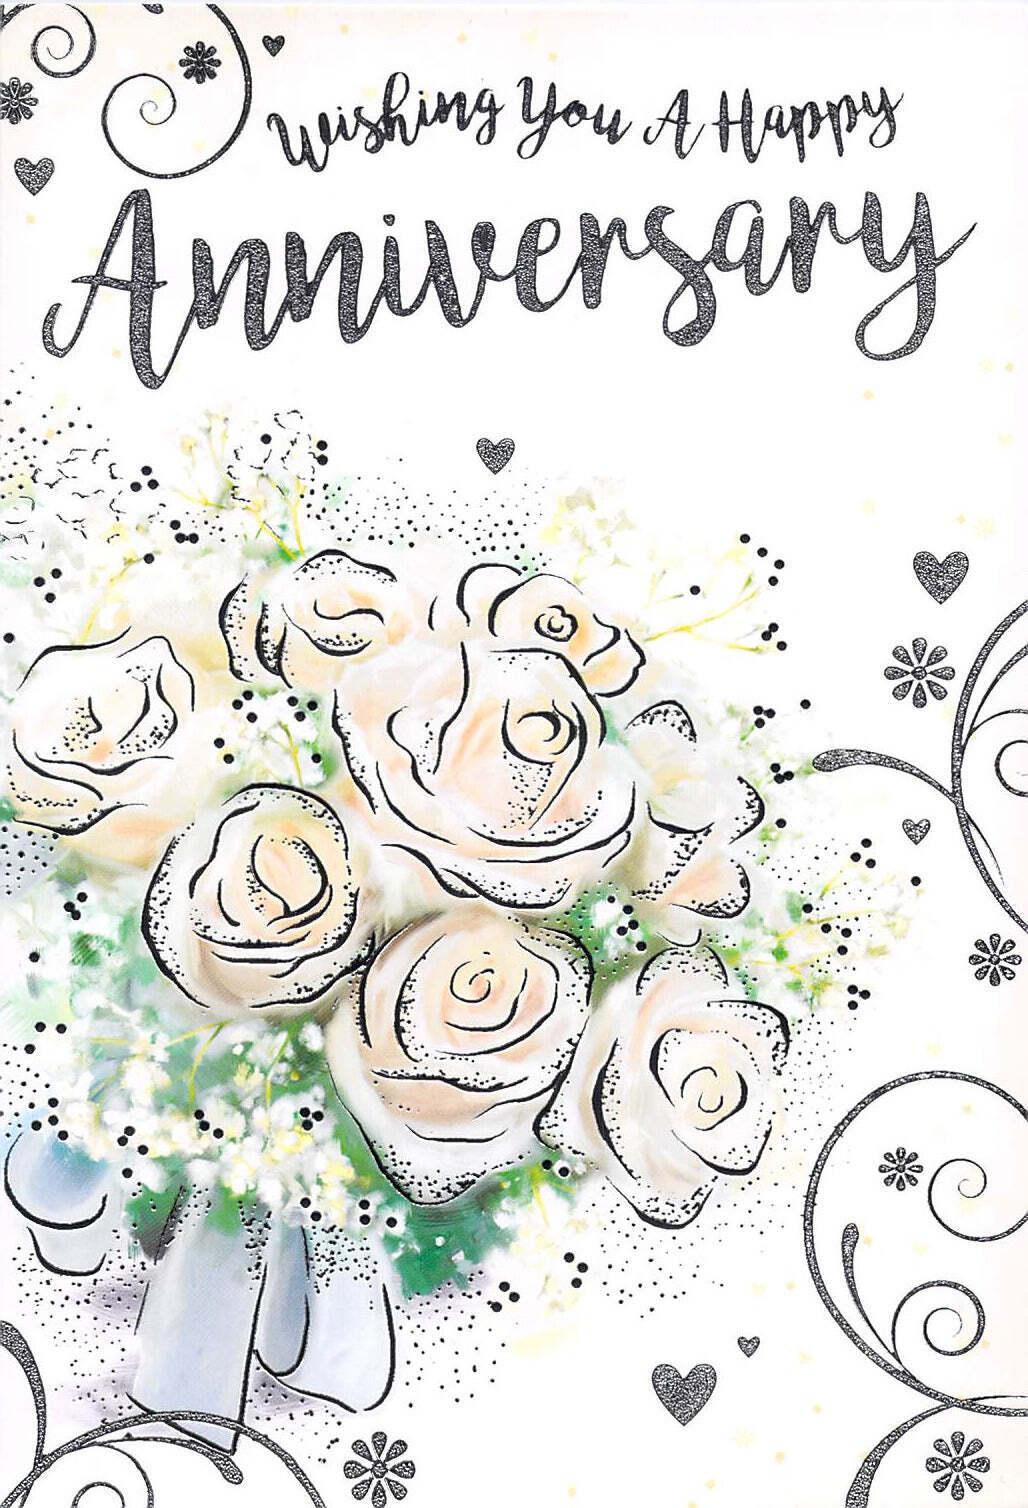 Anniversary - Your Anniversary - Silver Foil Roses - Greeting Card